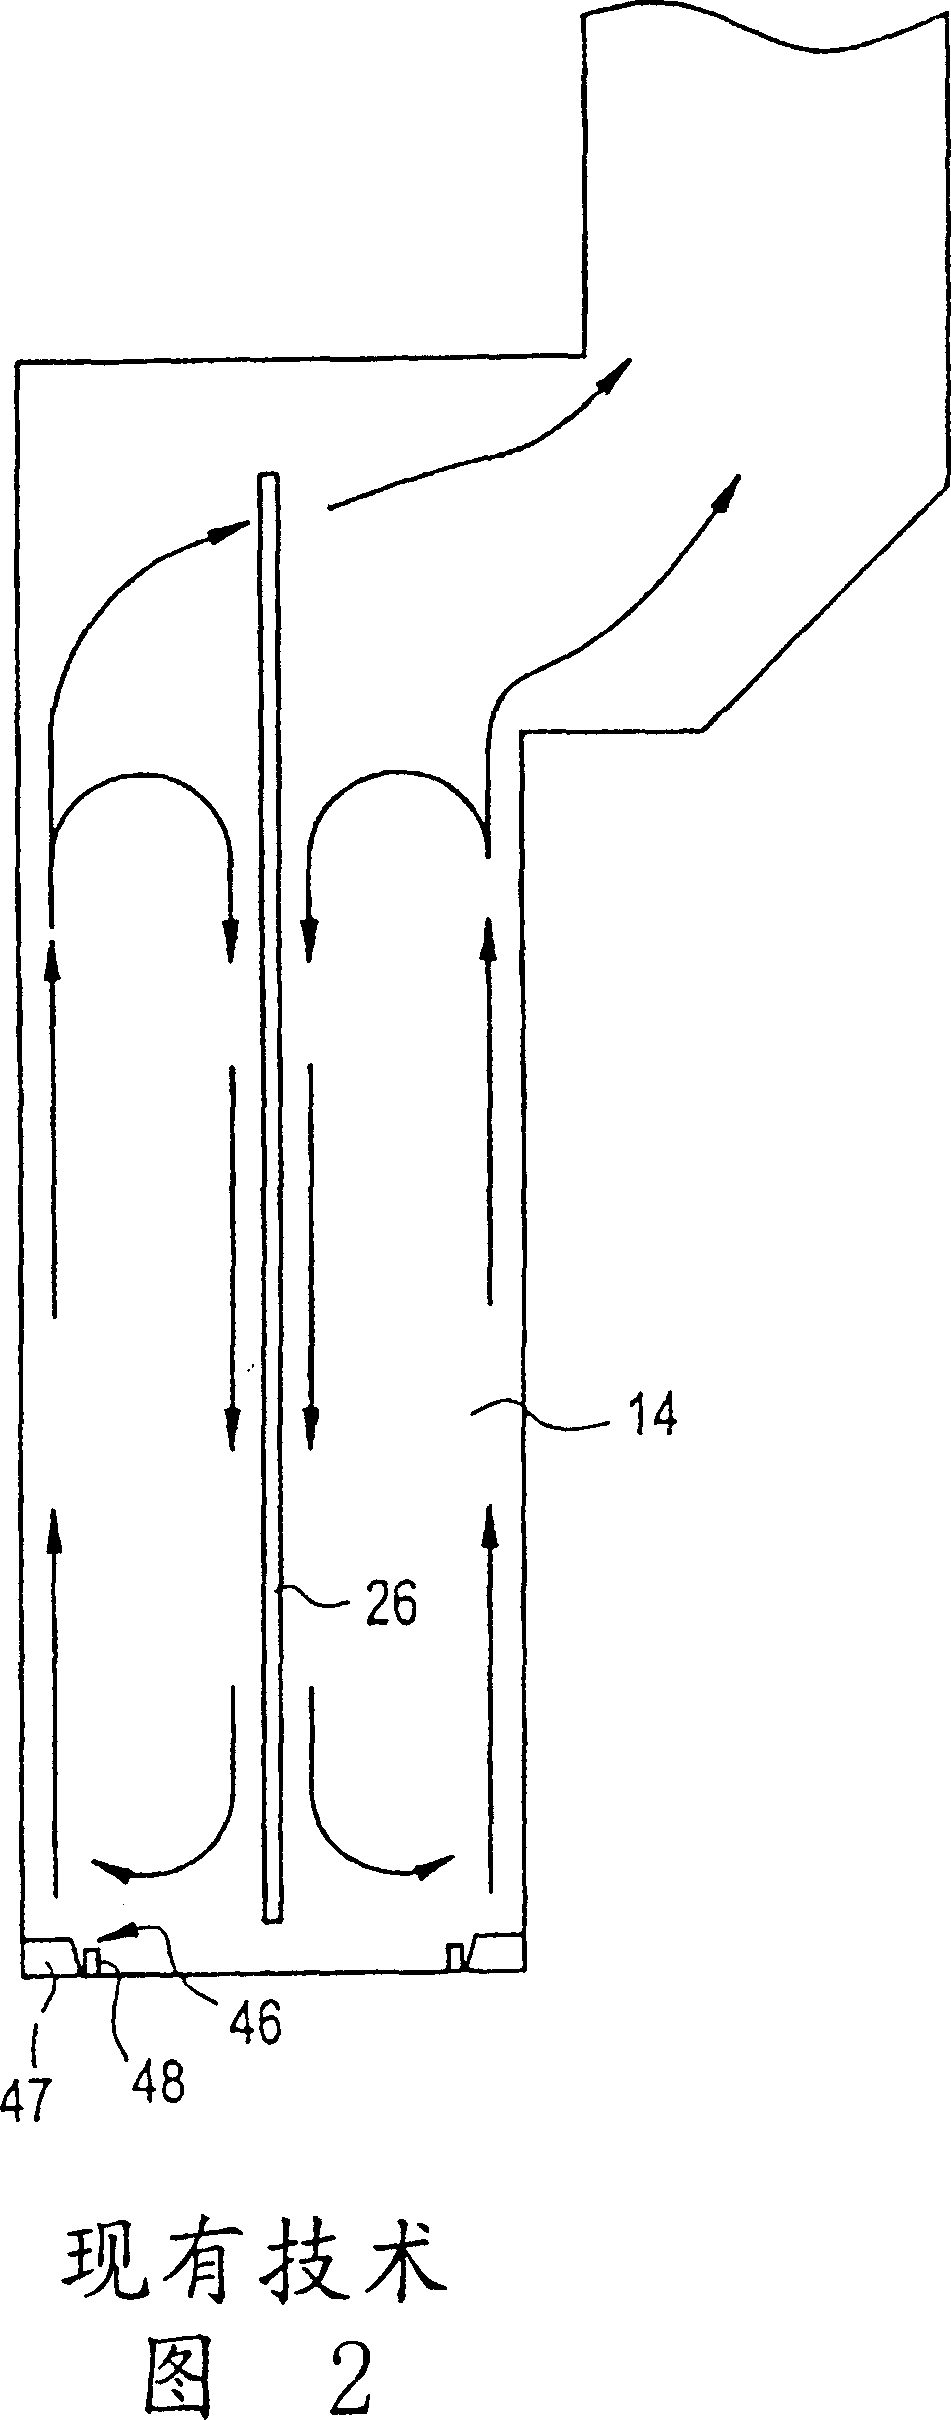 Pyrolysis heater with paired burner zoned firing system